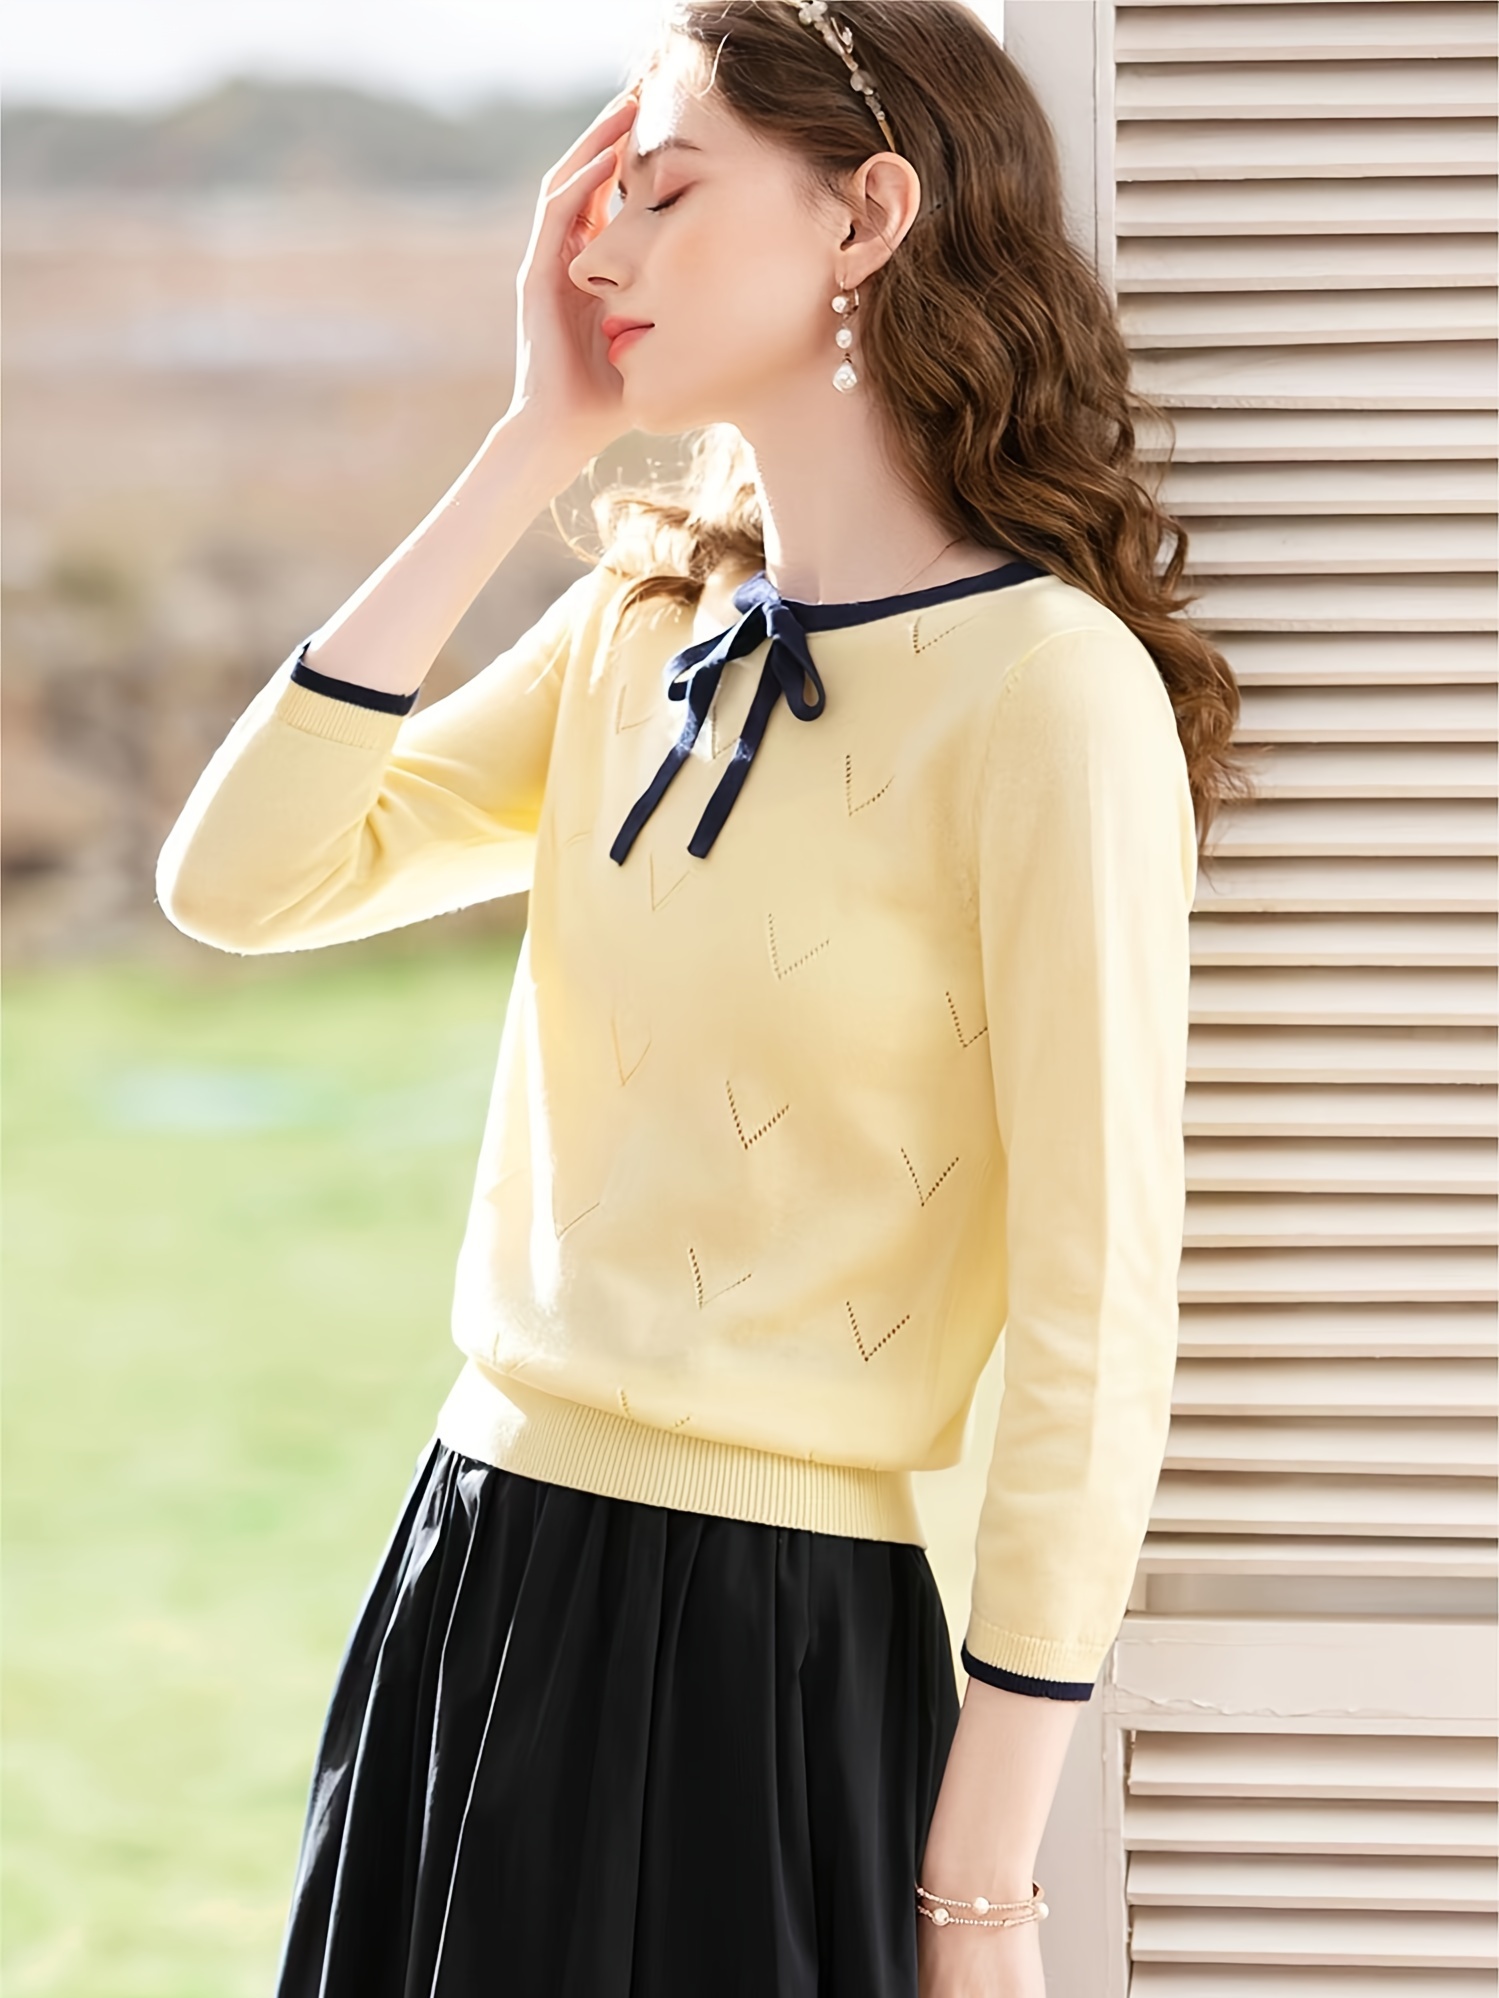 Bow Tie 3/4 Sleeve Knit Sweater, Elegant Crew Neck Eyelet Comfy Sweater For Spring & Summer, Women's Clothing